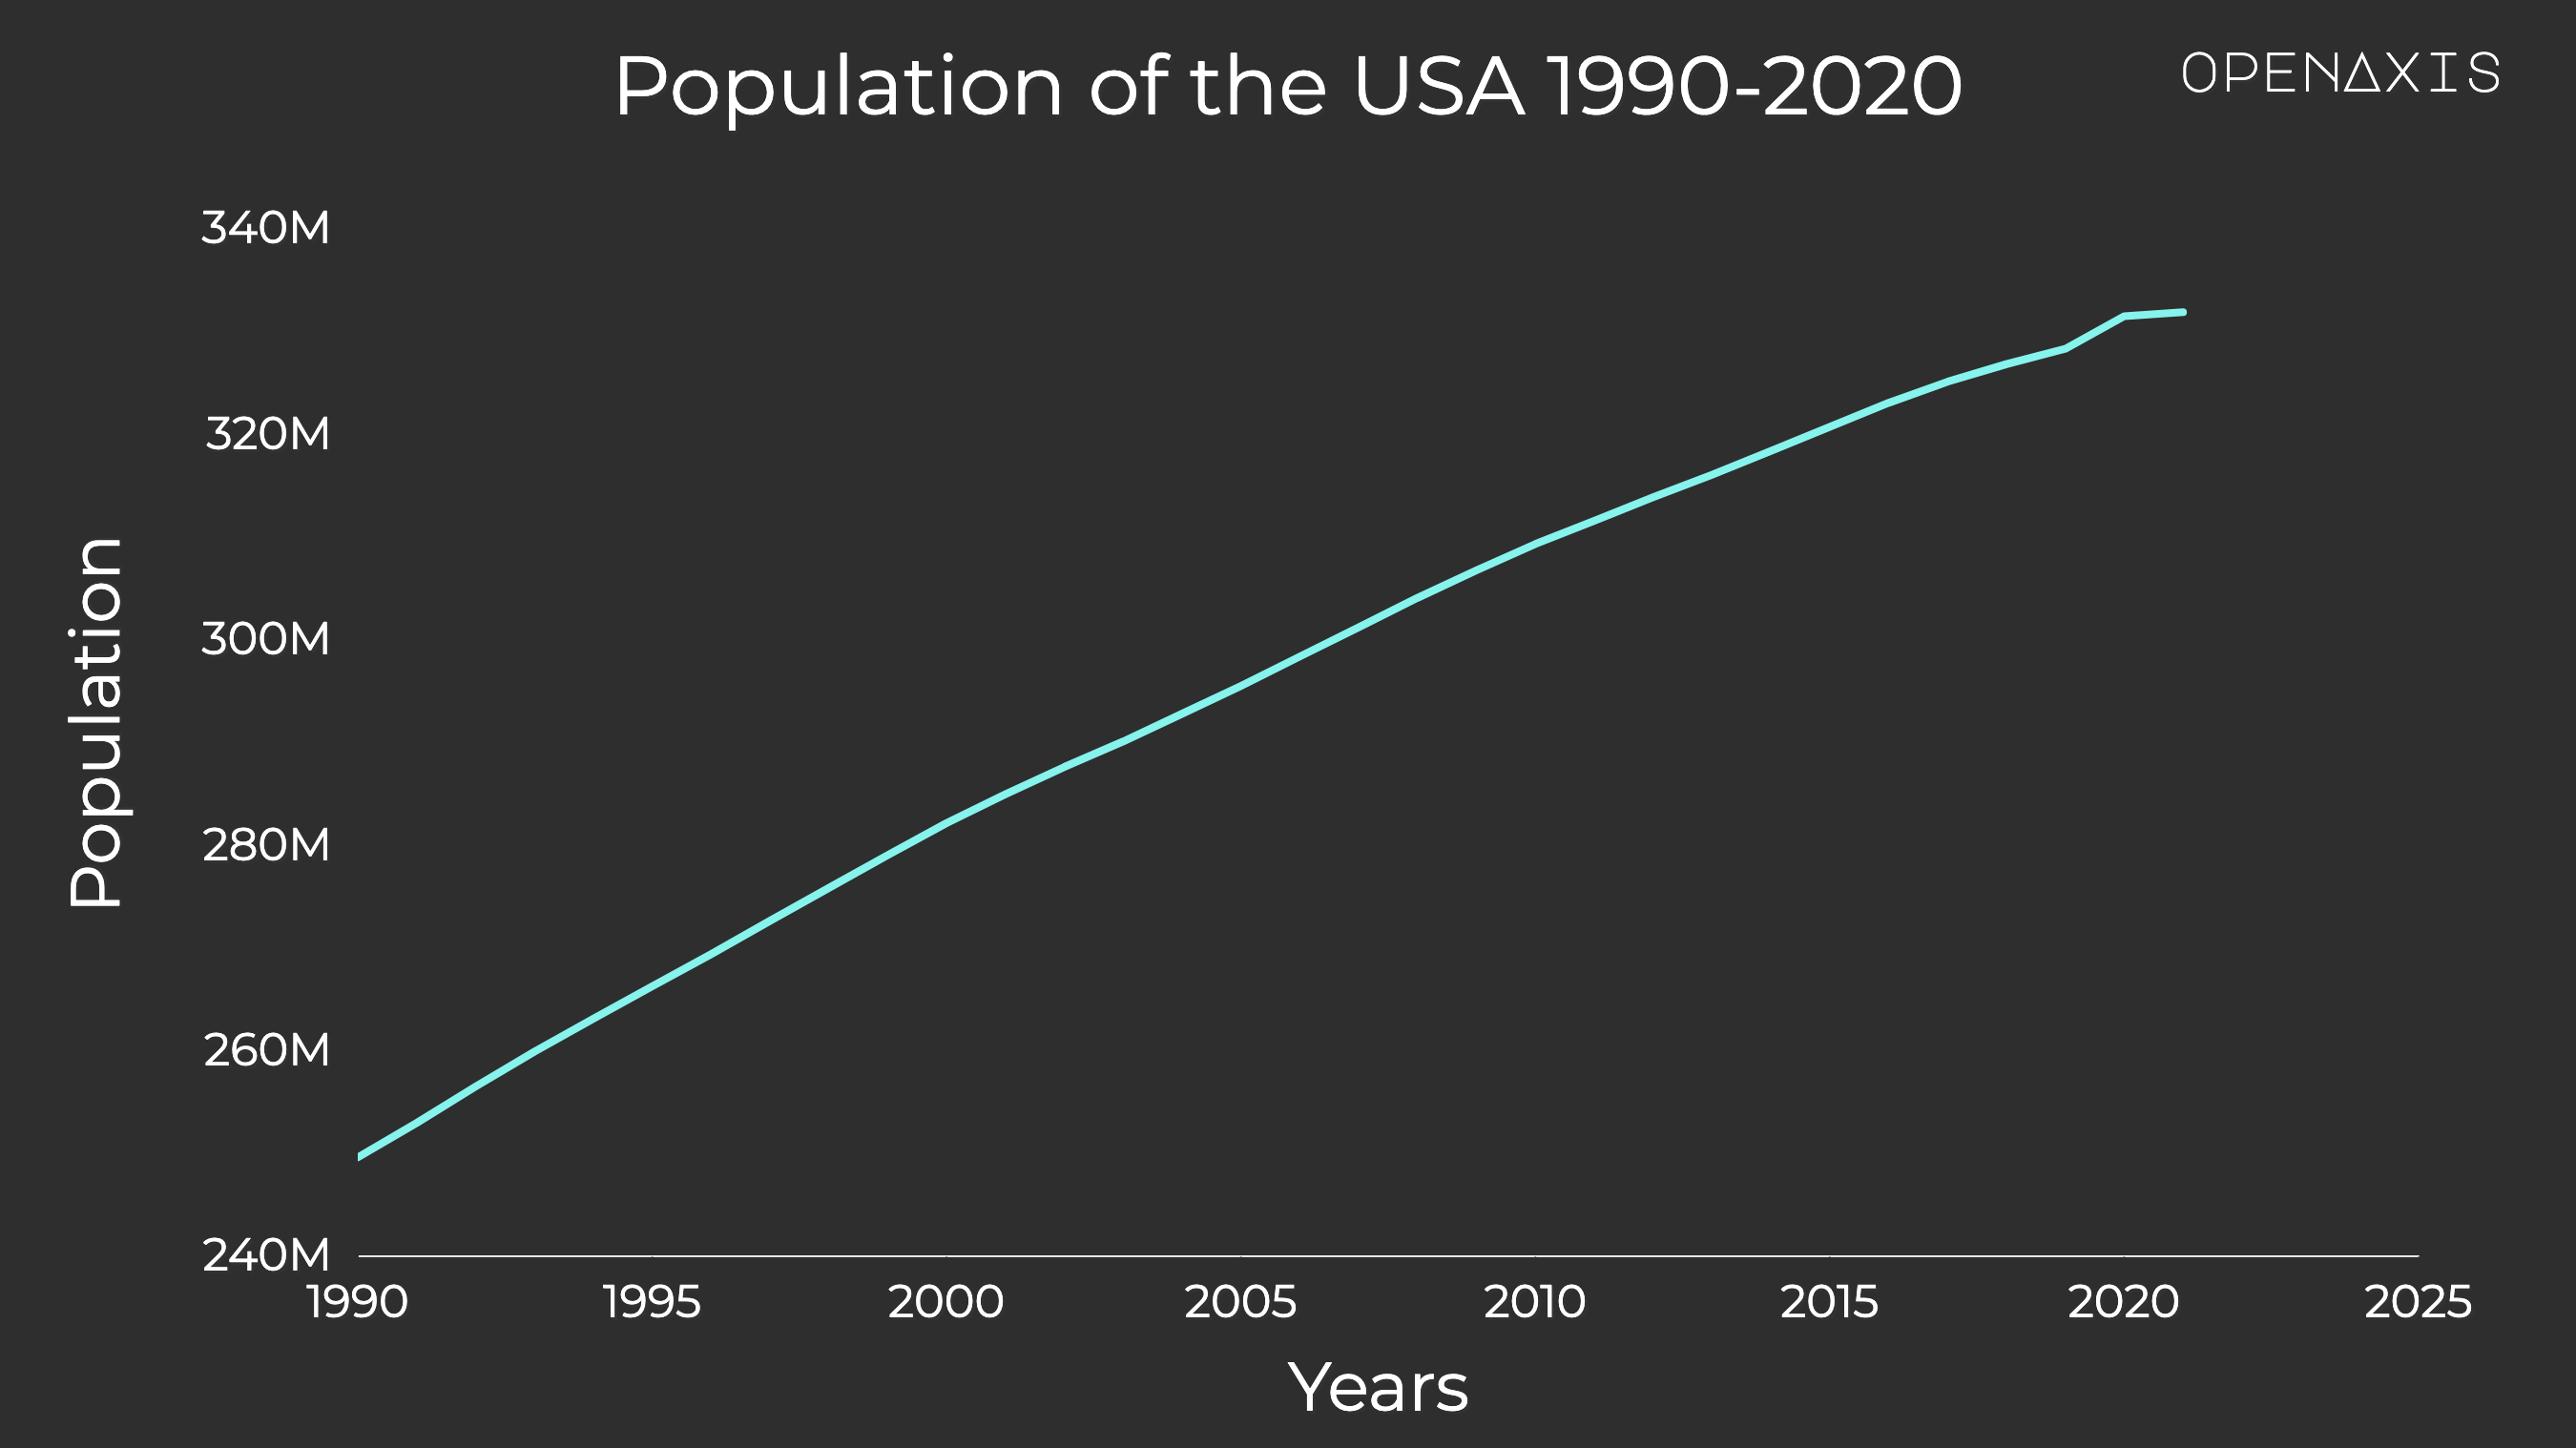 "Population of the USA 1990-2020"